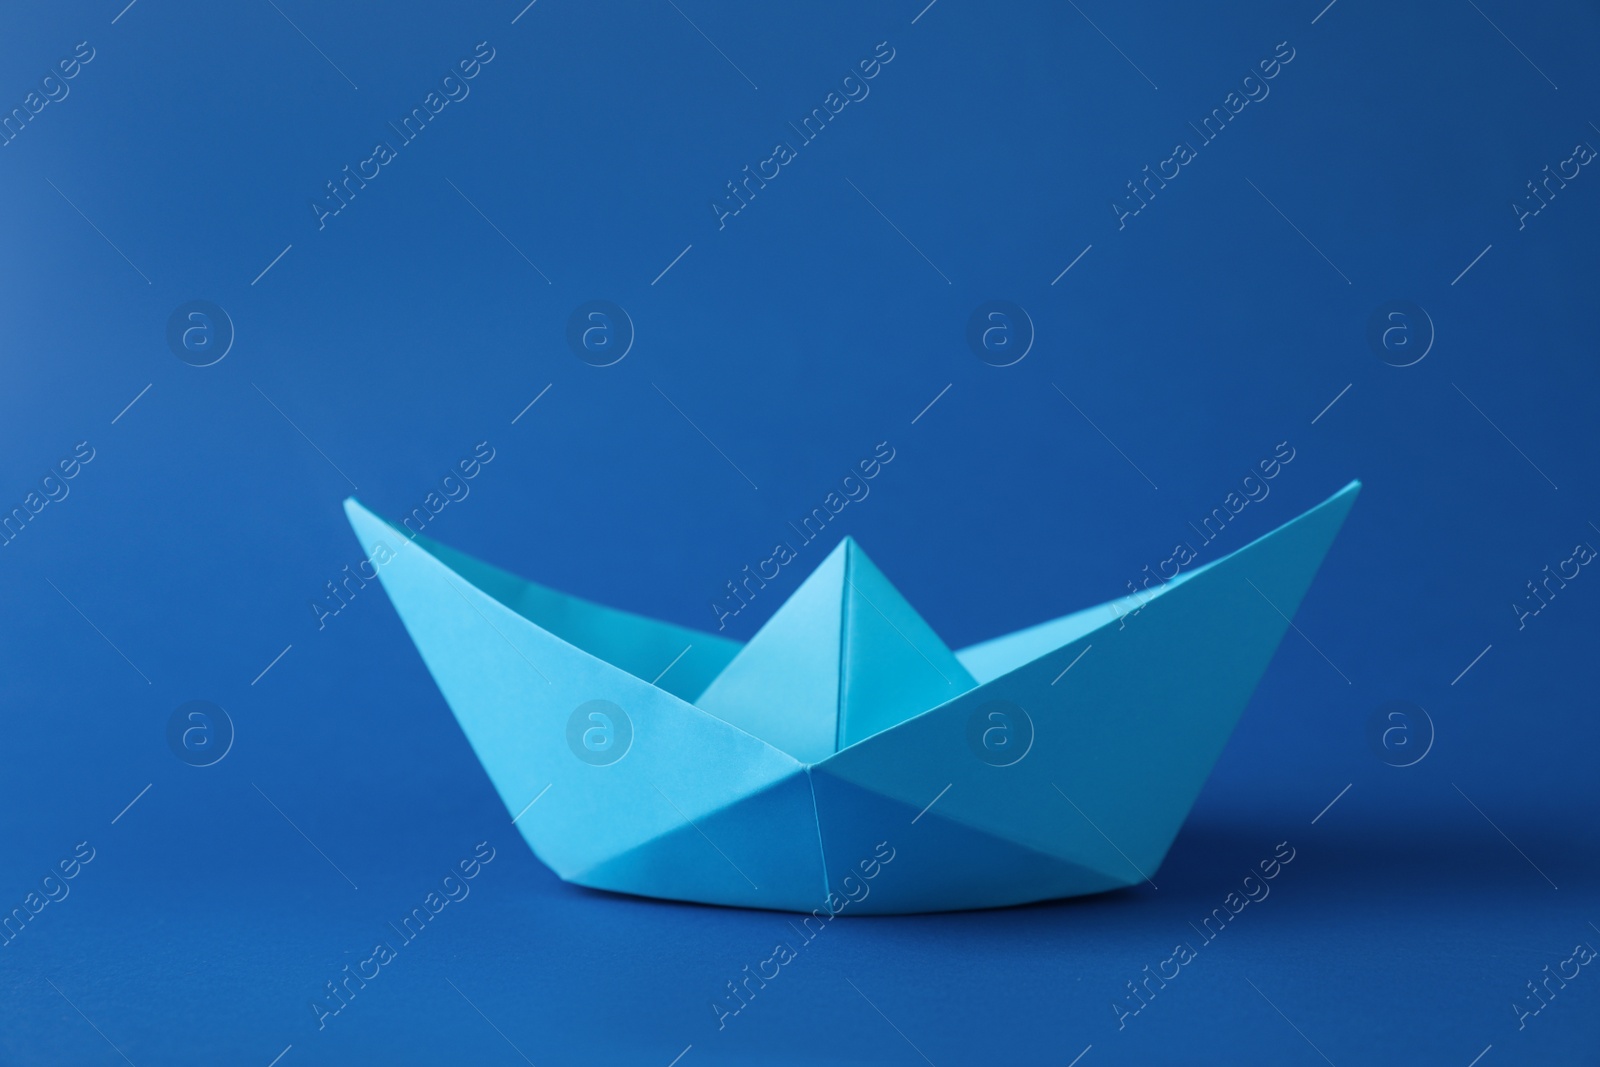 Photo of Handmade paper boat on blue background. Origami art